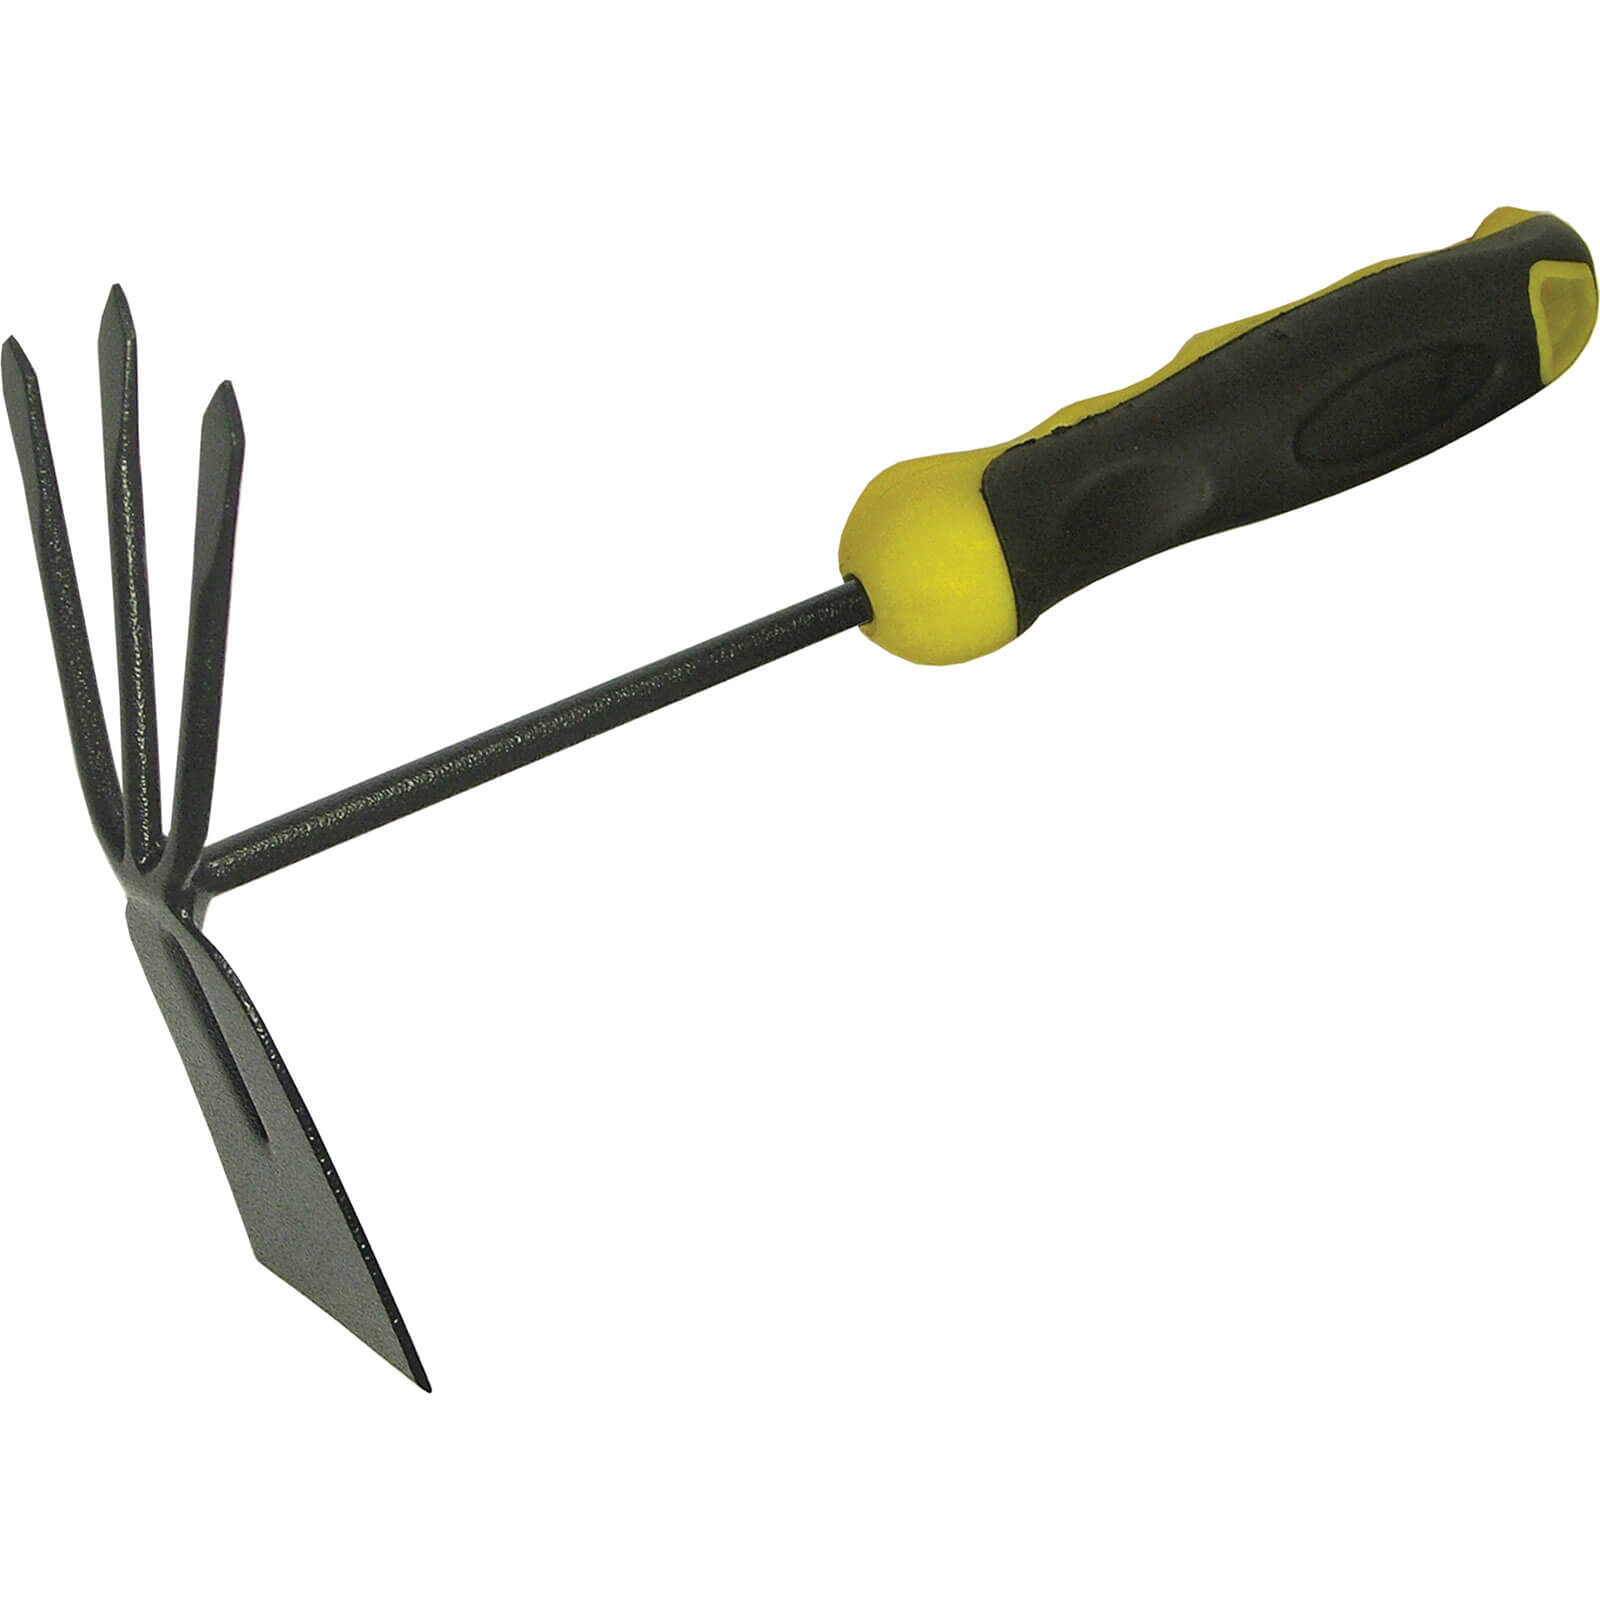 Faithfull 3 Prong Hand Hoe Cultivator with Soft Grip